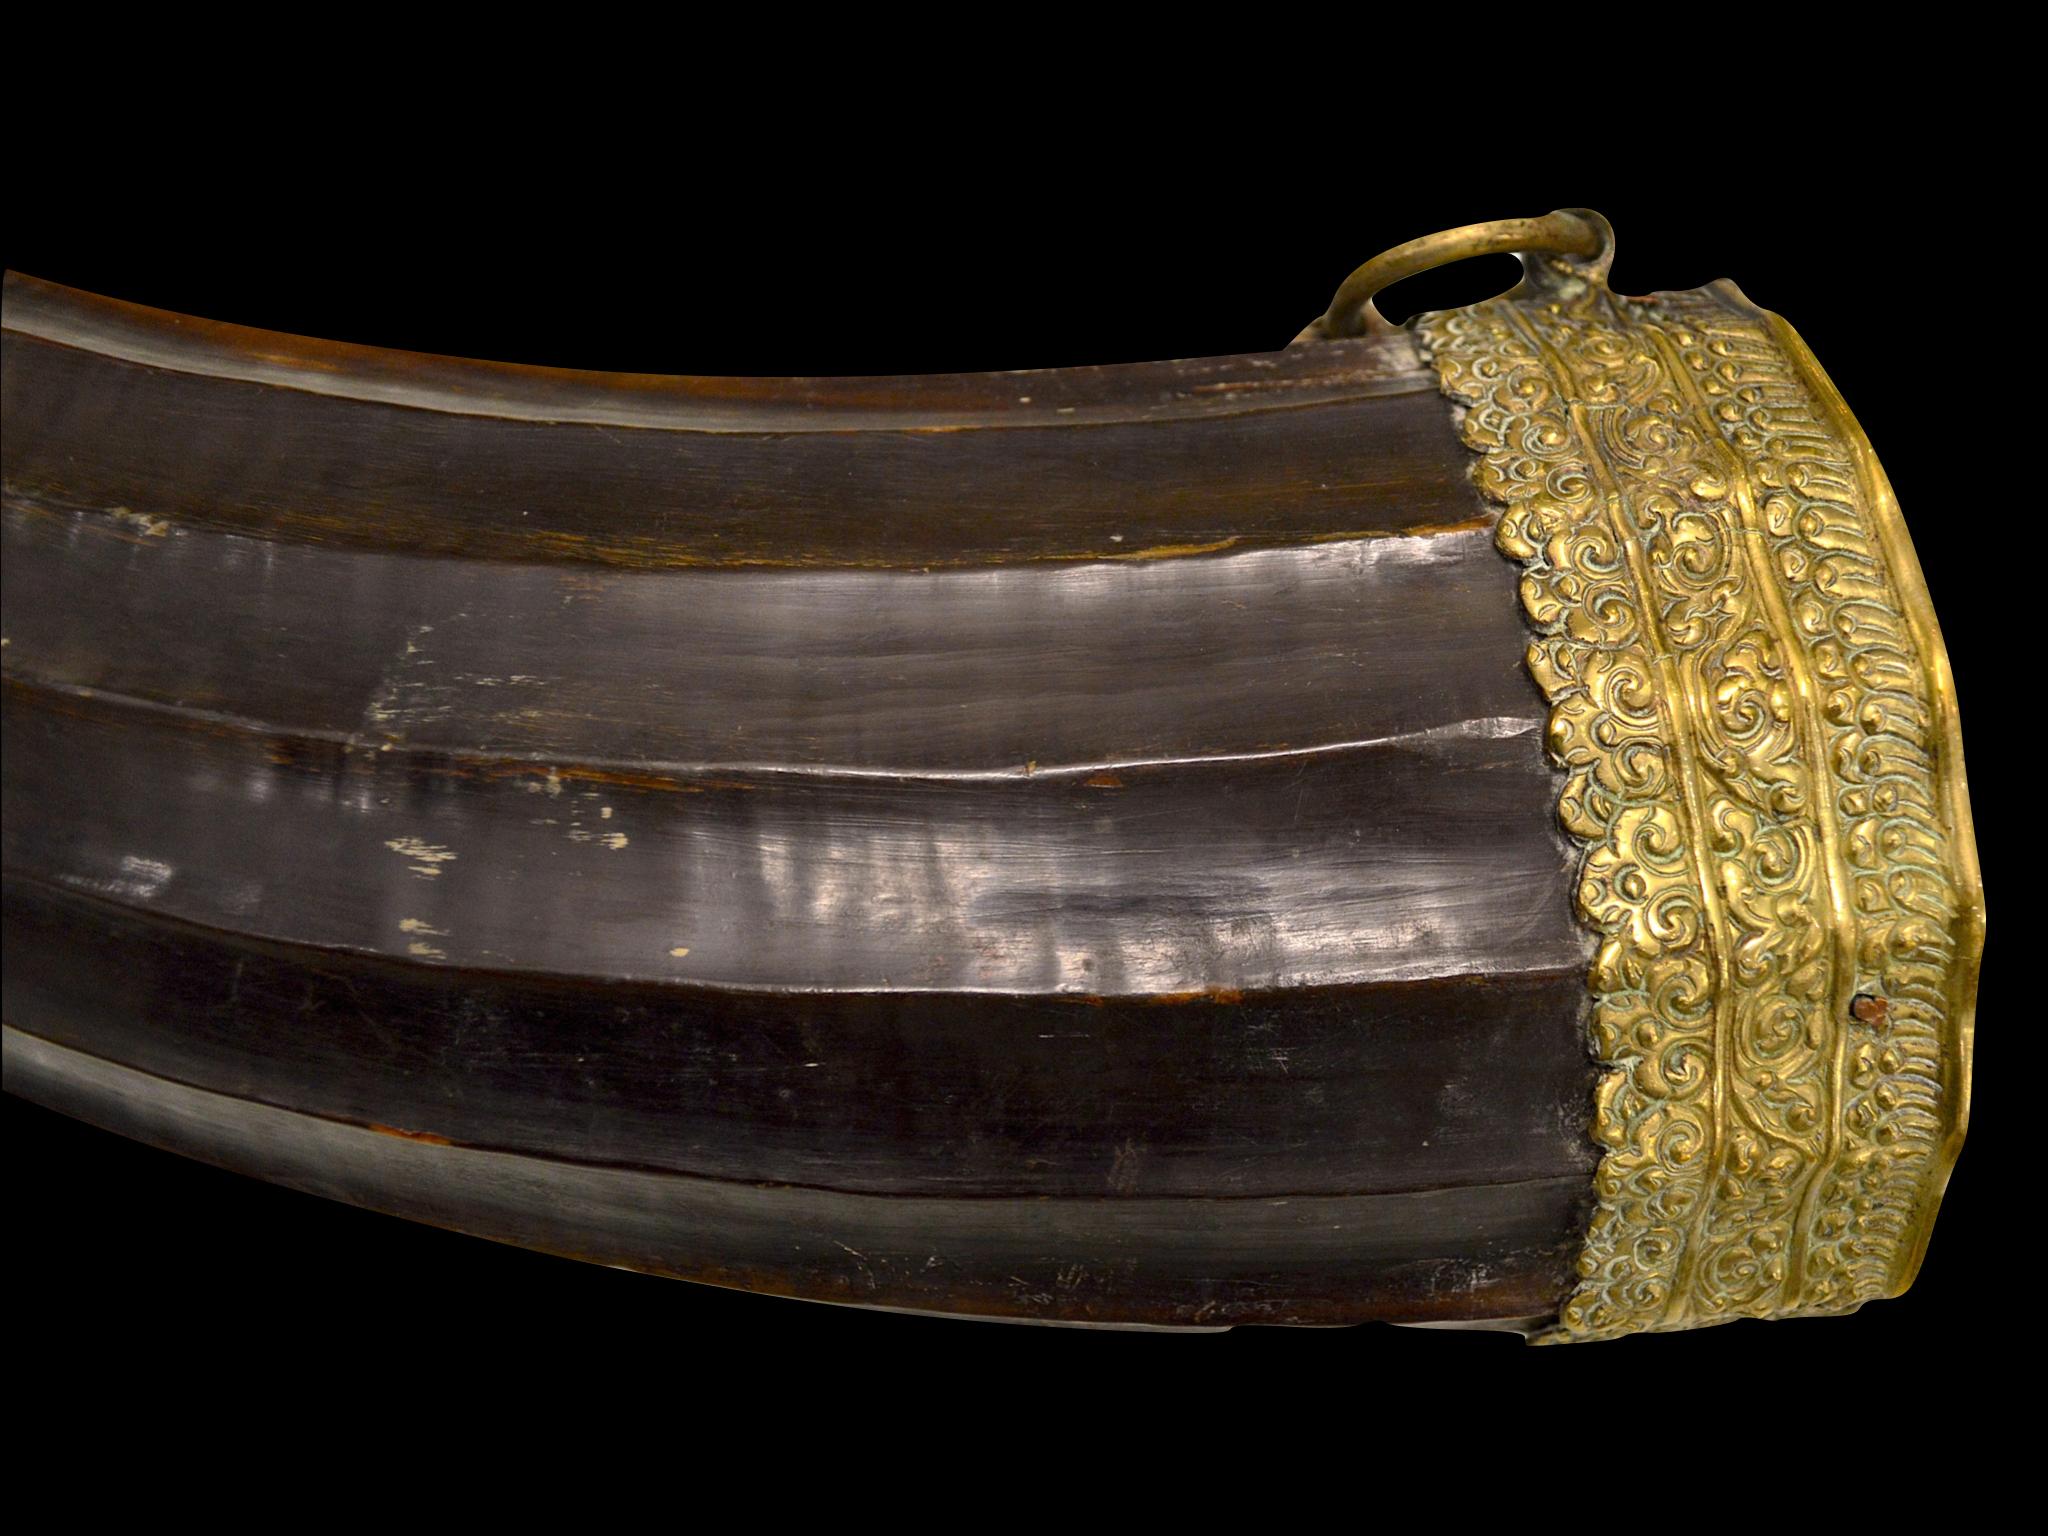 Hand-Crafted Chaang Drinking Horn, Tibet, 19th Century